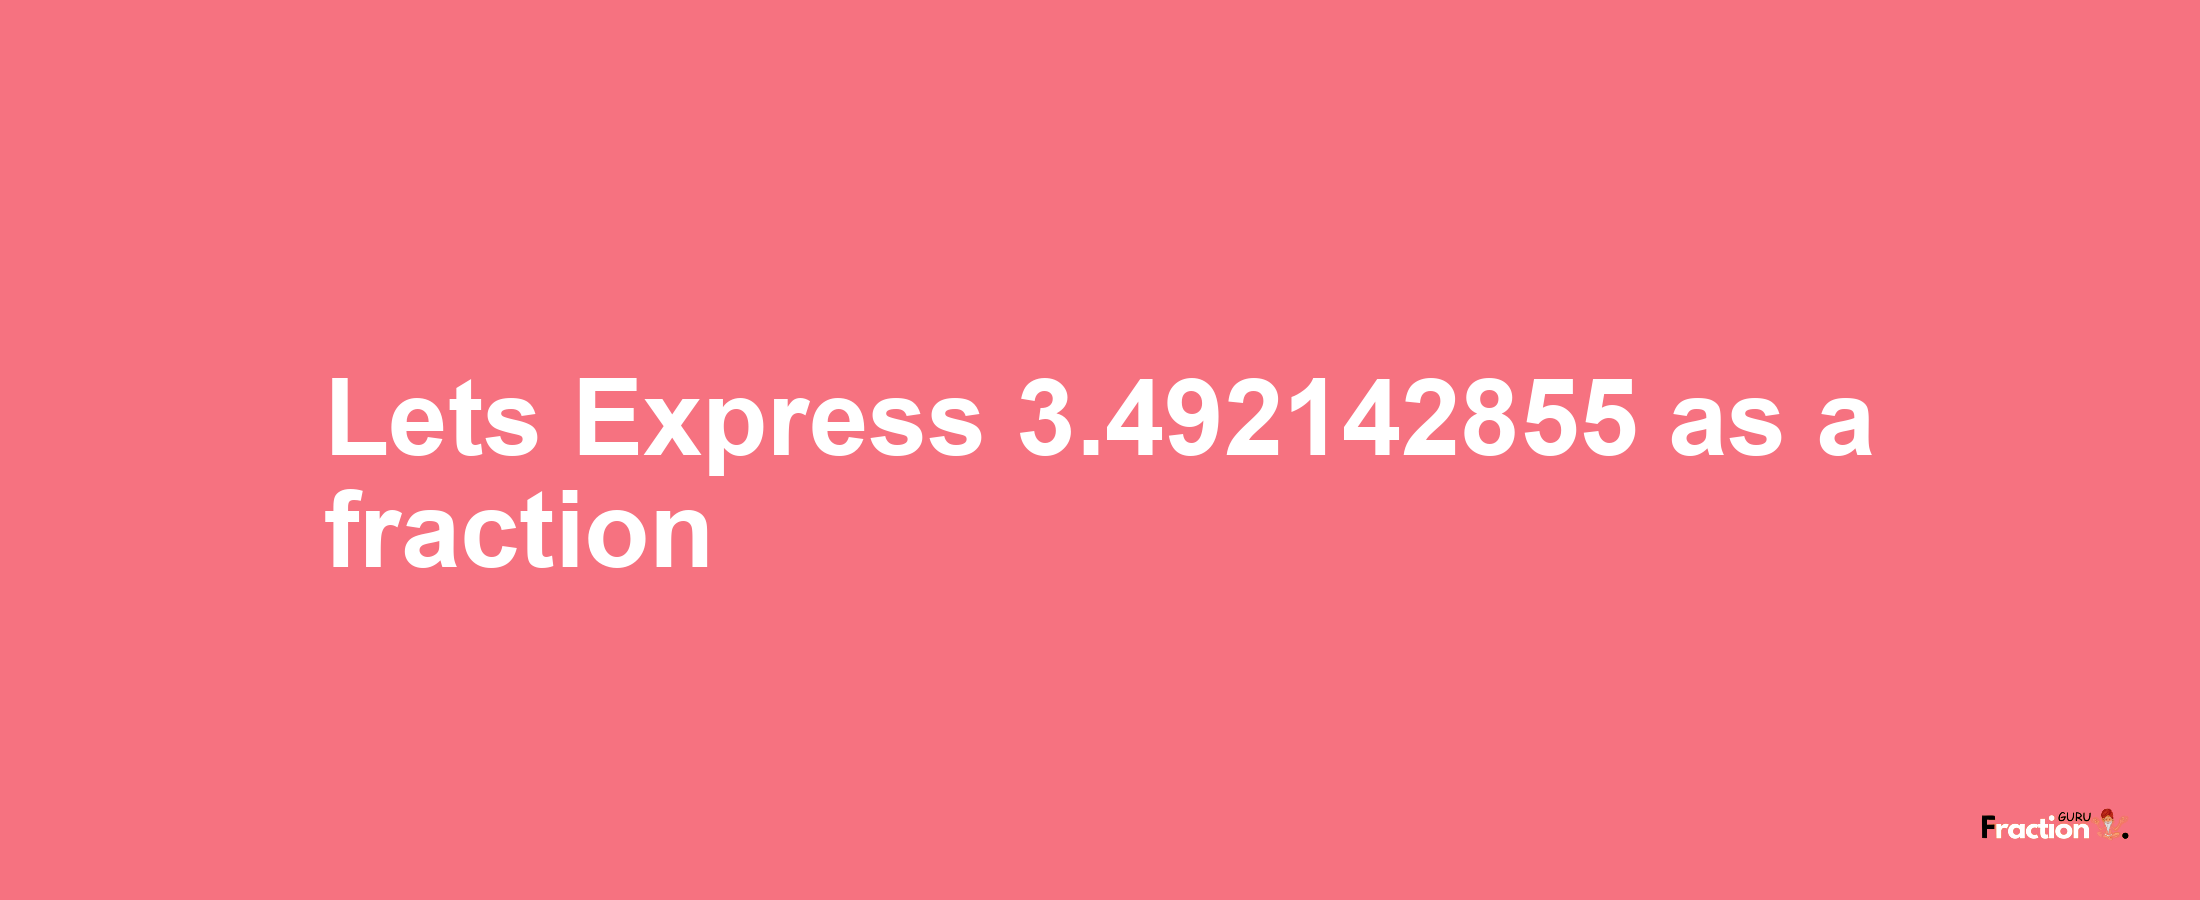 Lets Express 3.492142855 as afraction